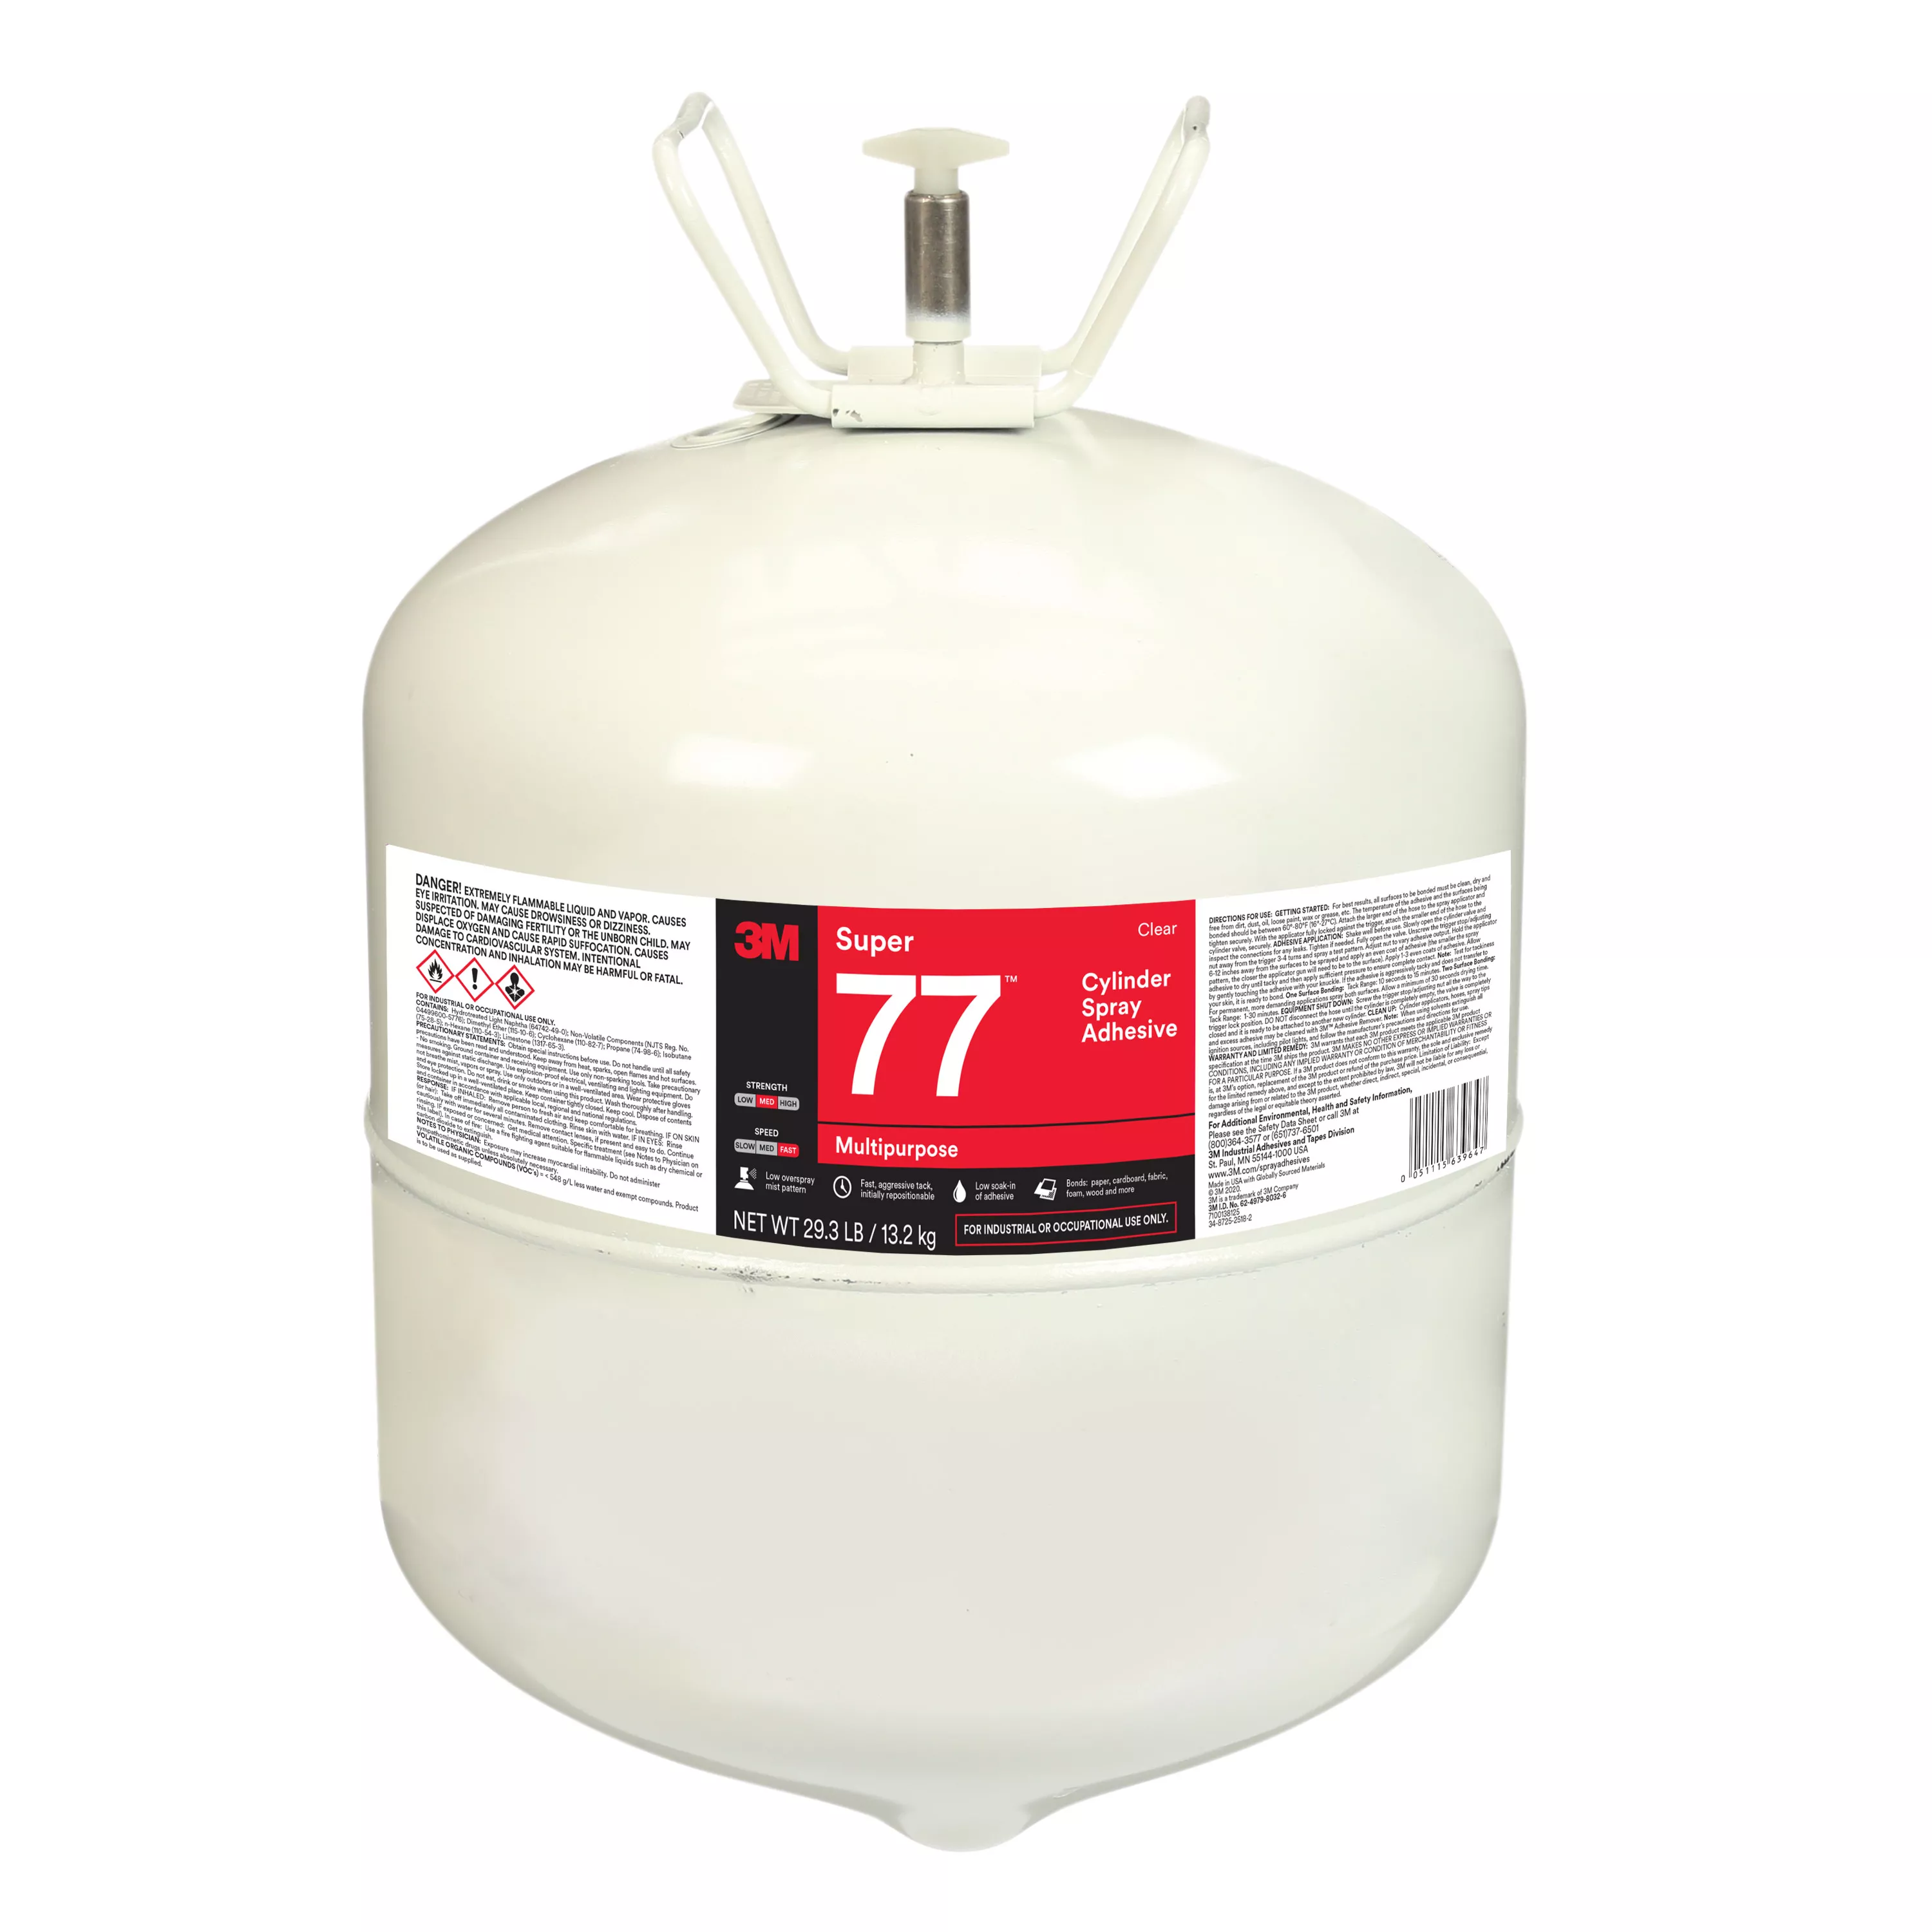 3M™ Super 77™ Multipurpose Cylinder Spray Adhesive, Clear, Large (Net Wt
29.3 lb), 1 Each/Case